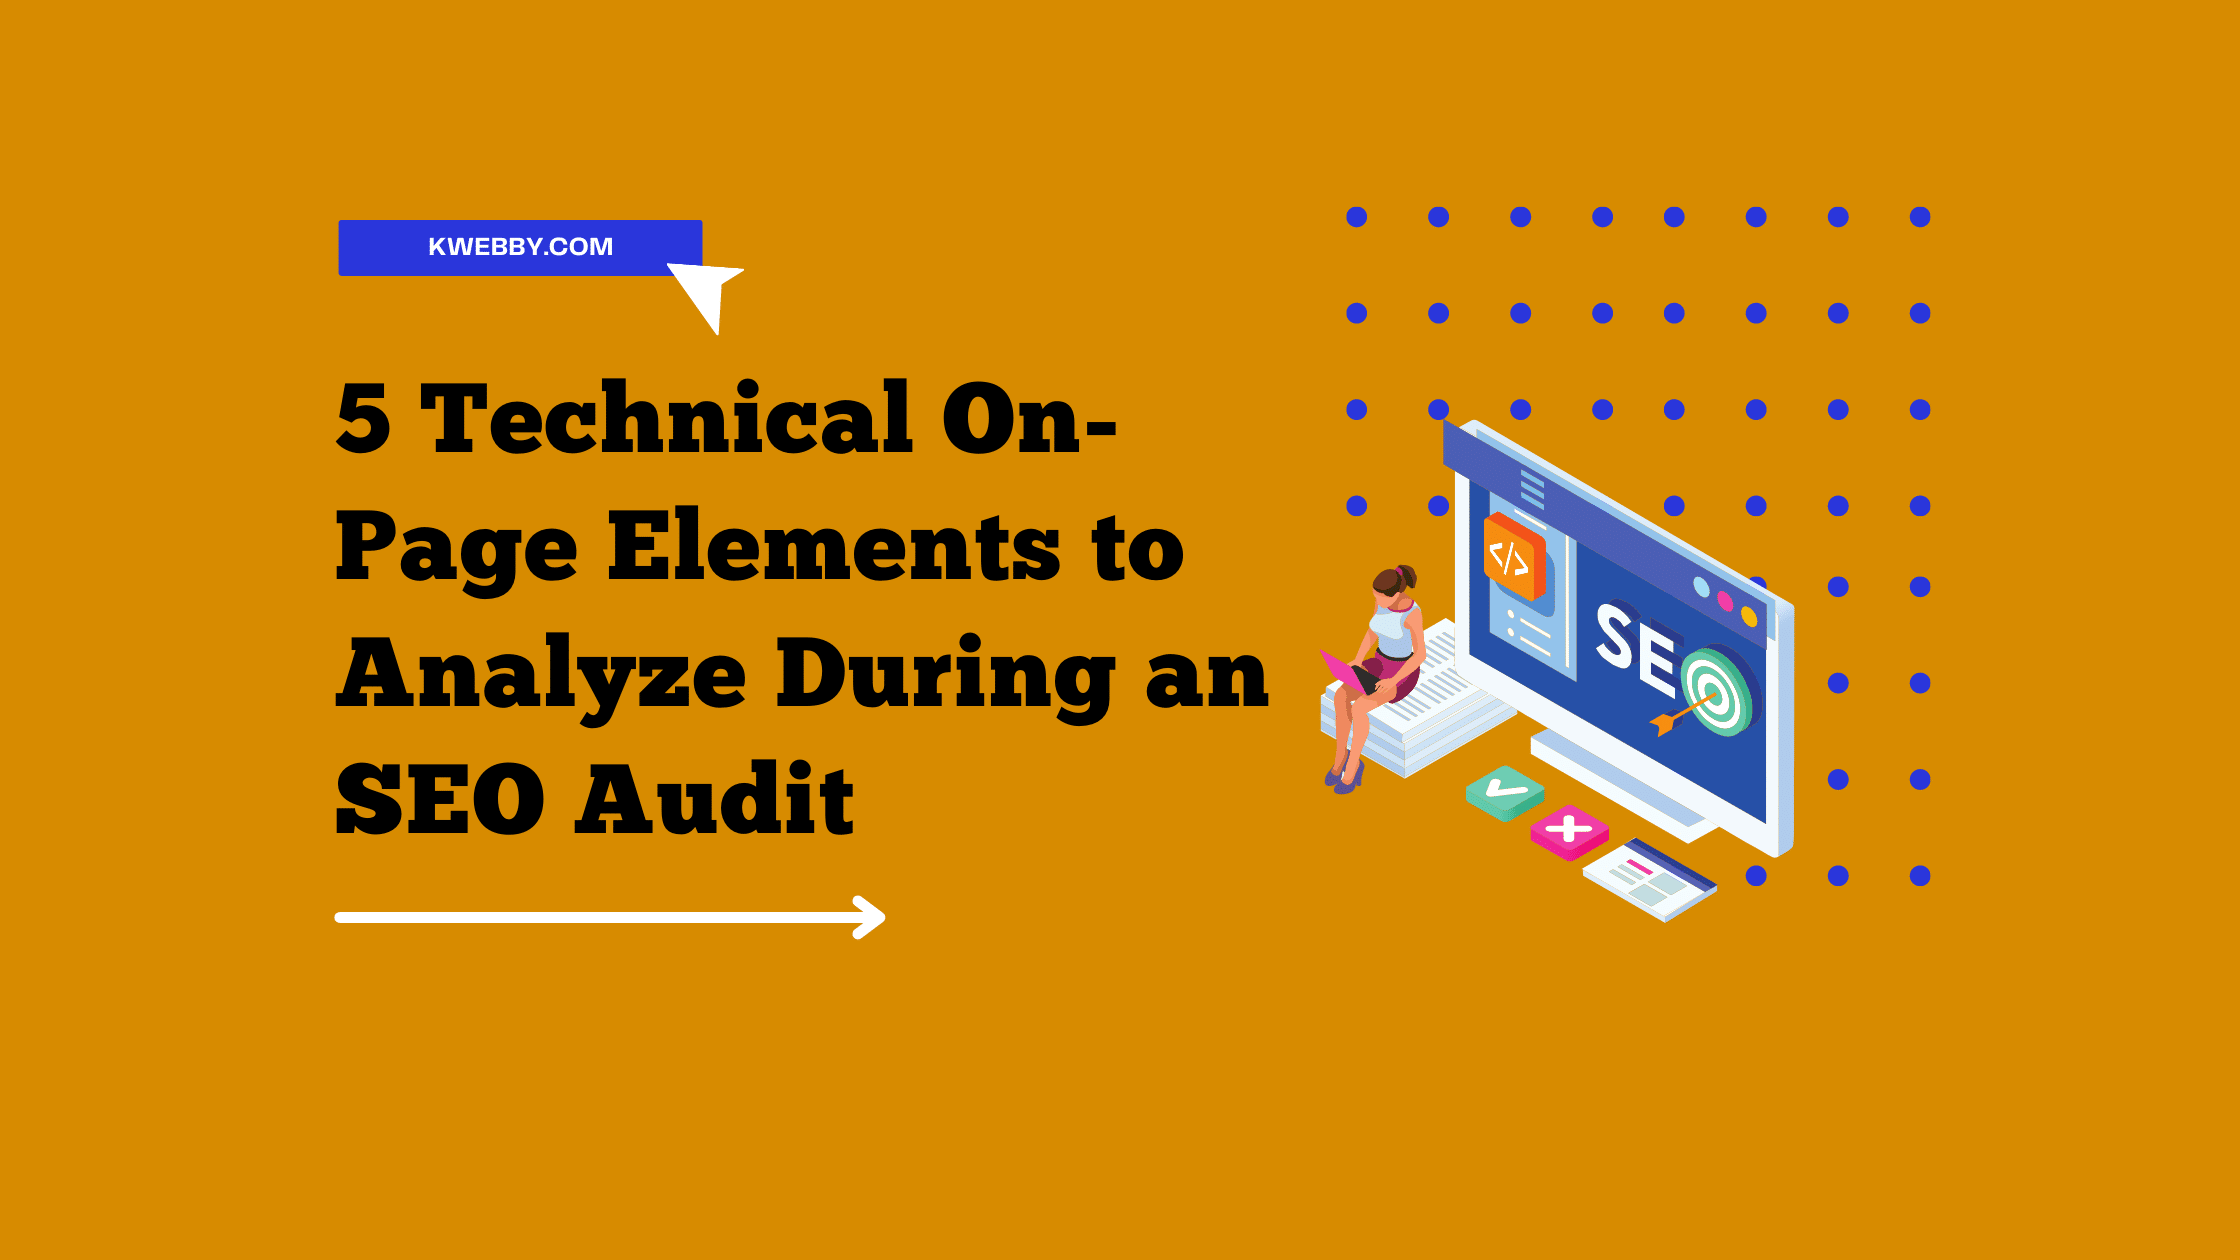 5 Technical On-Page Elements to Analyze During an SEO Audit to Rank Quickly